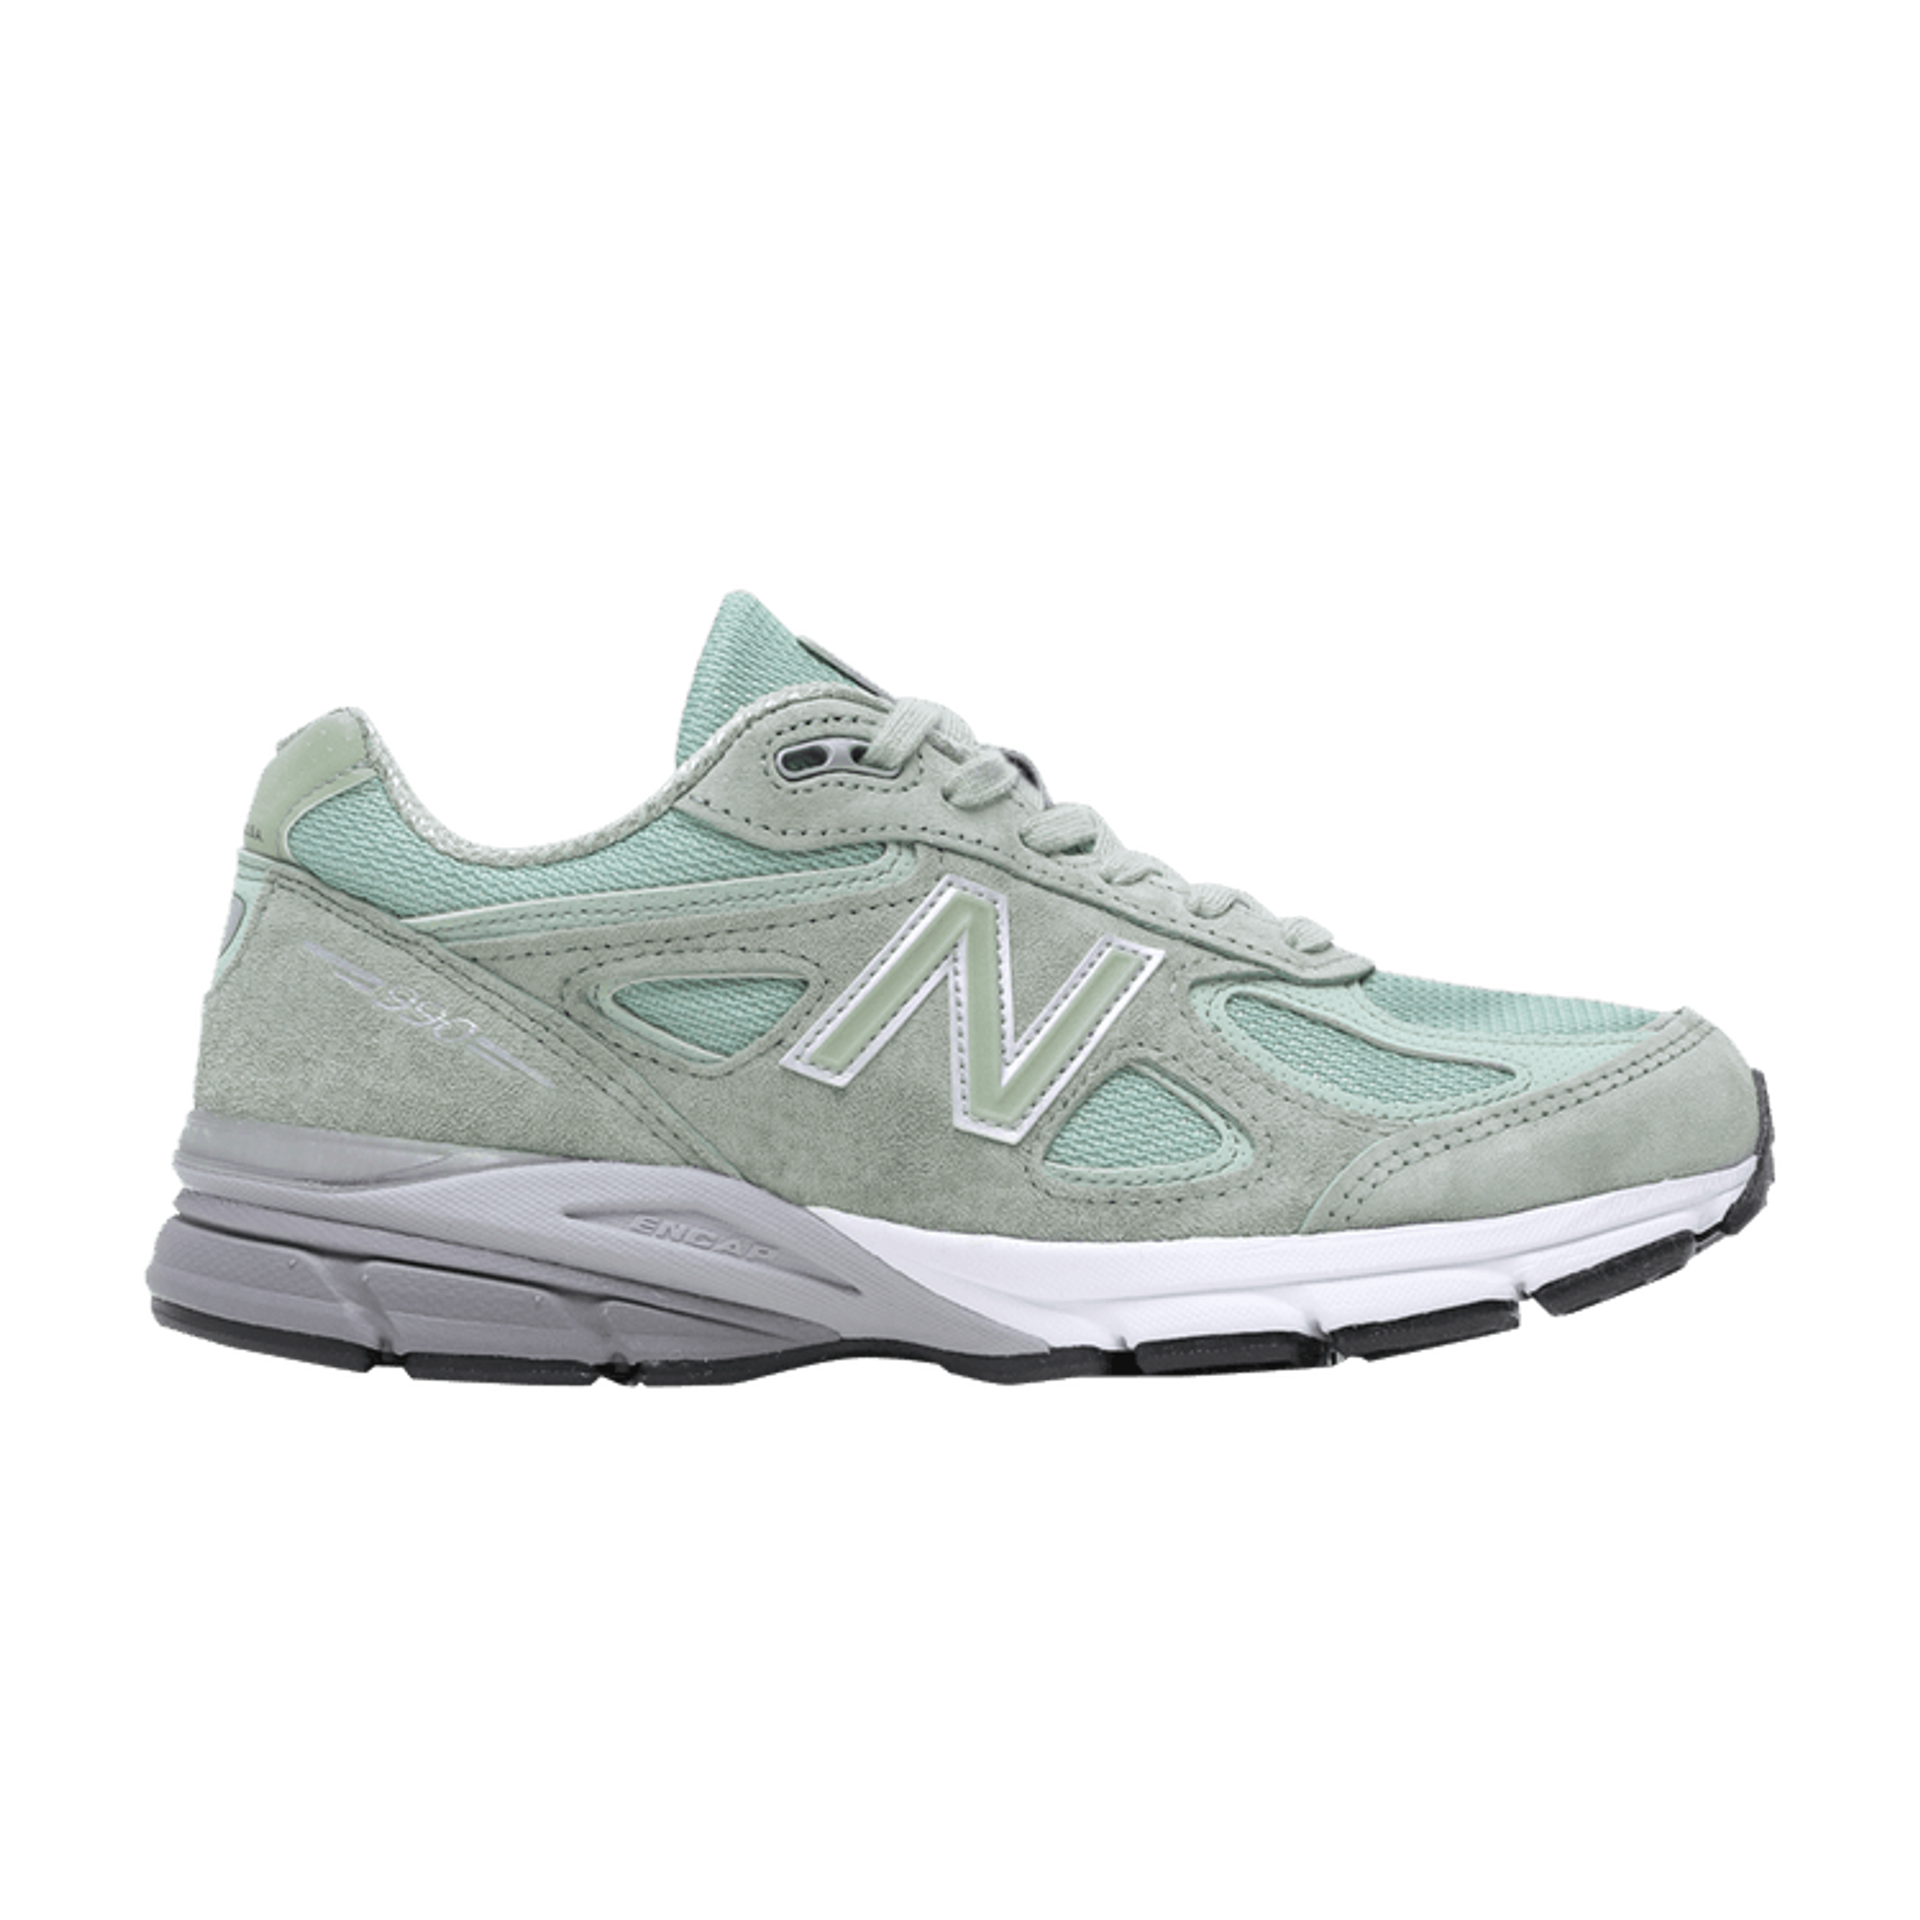 New Balance Wmns 990v4 Made in USA 'Mint'